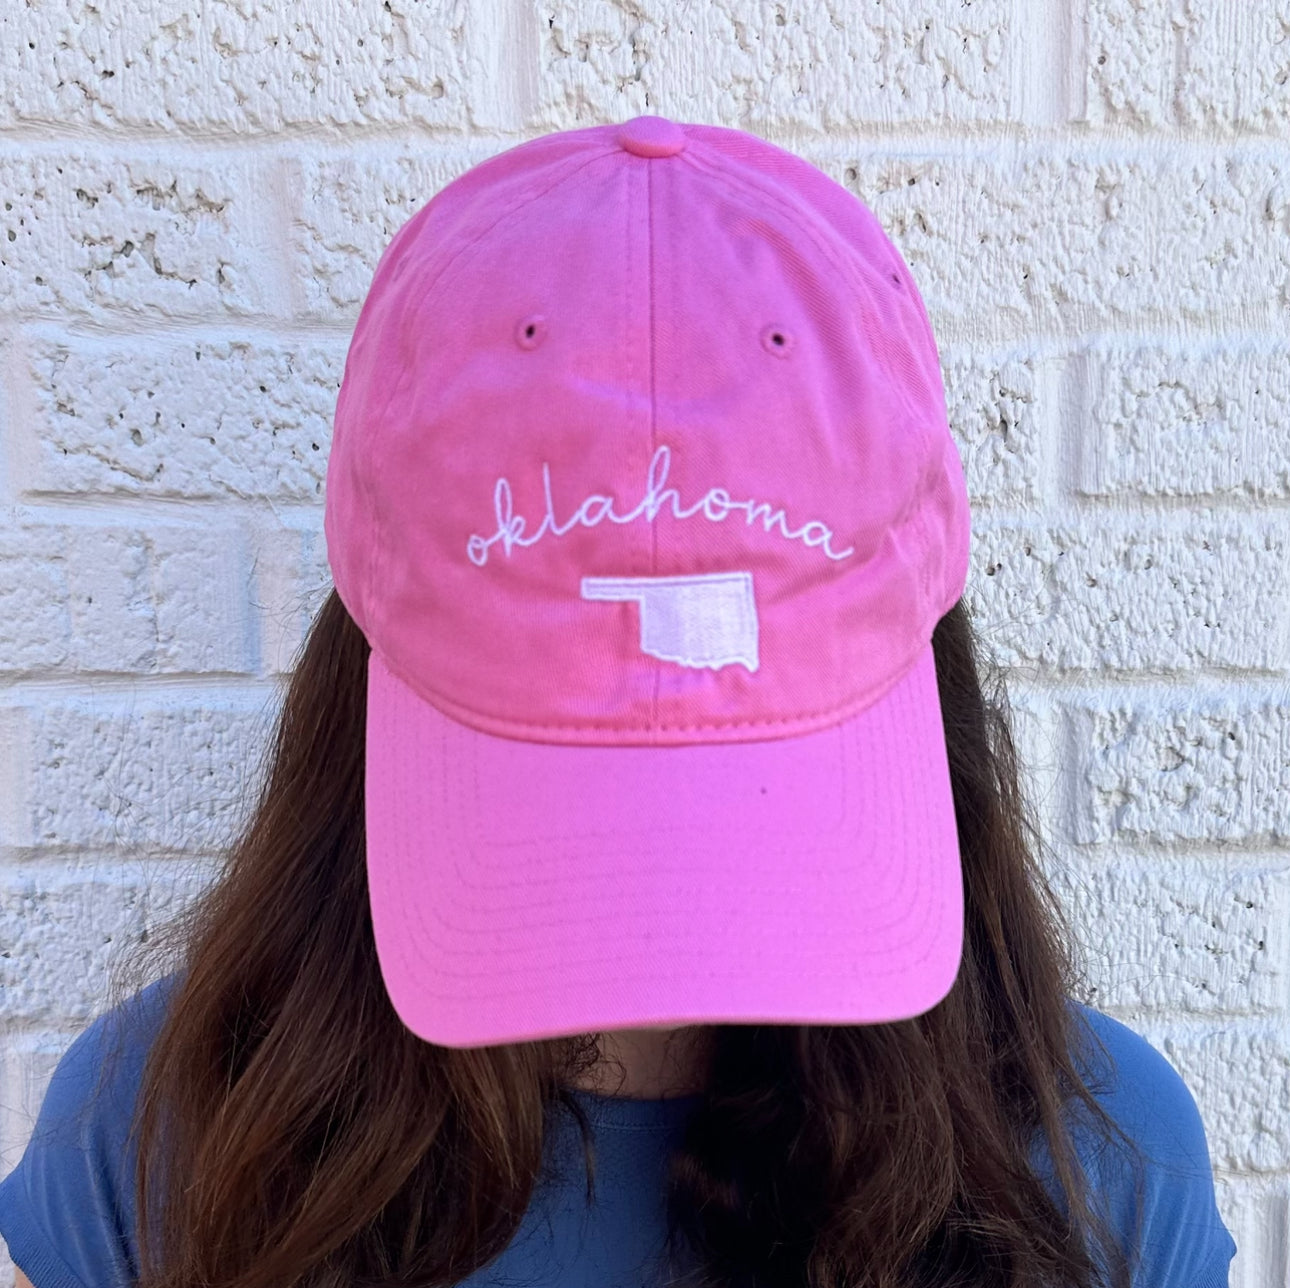 Oklahoma Spring Hat (PINK COTTON HAT w/ WHITE Embroidery)